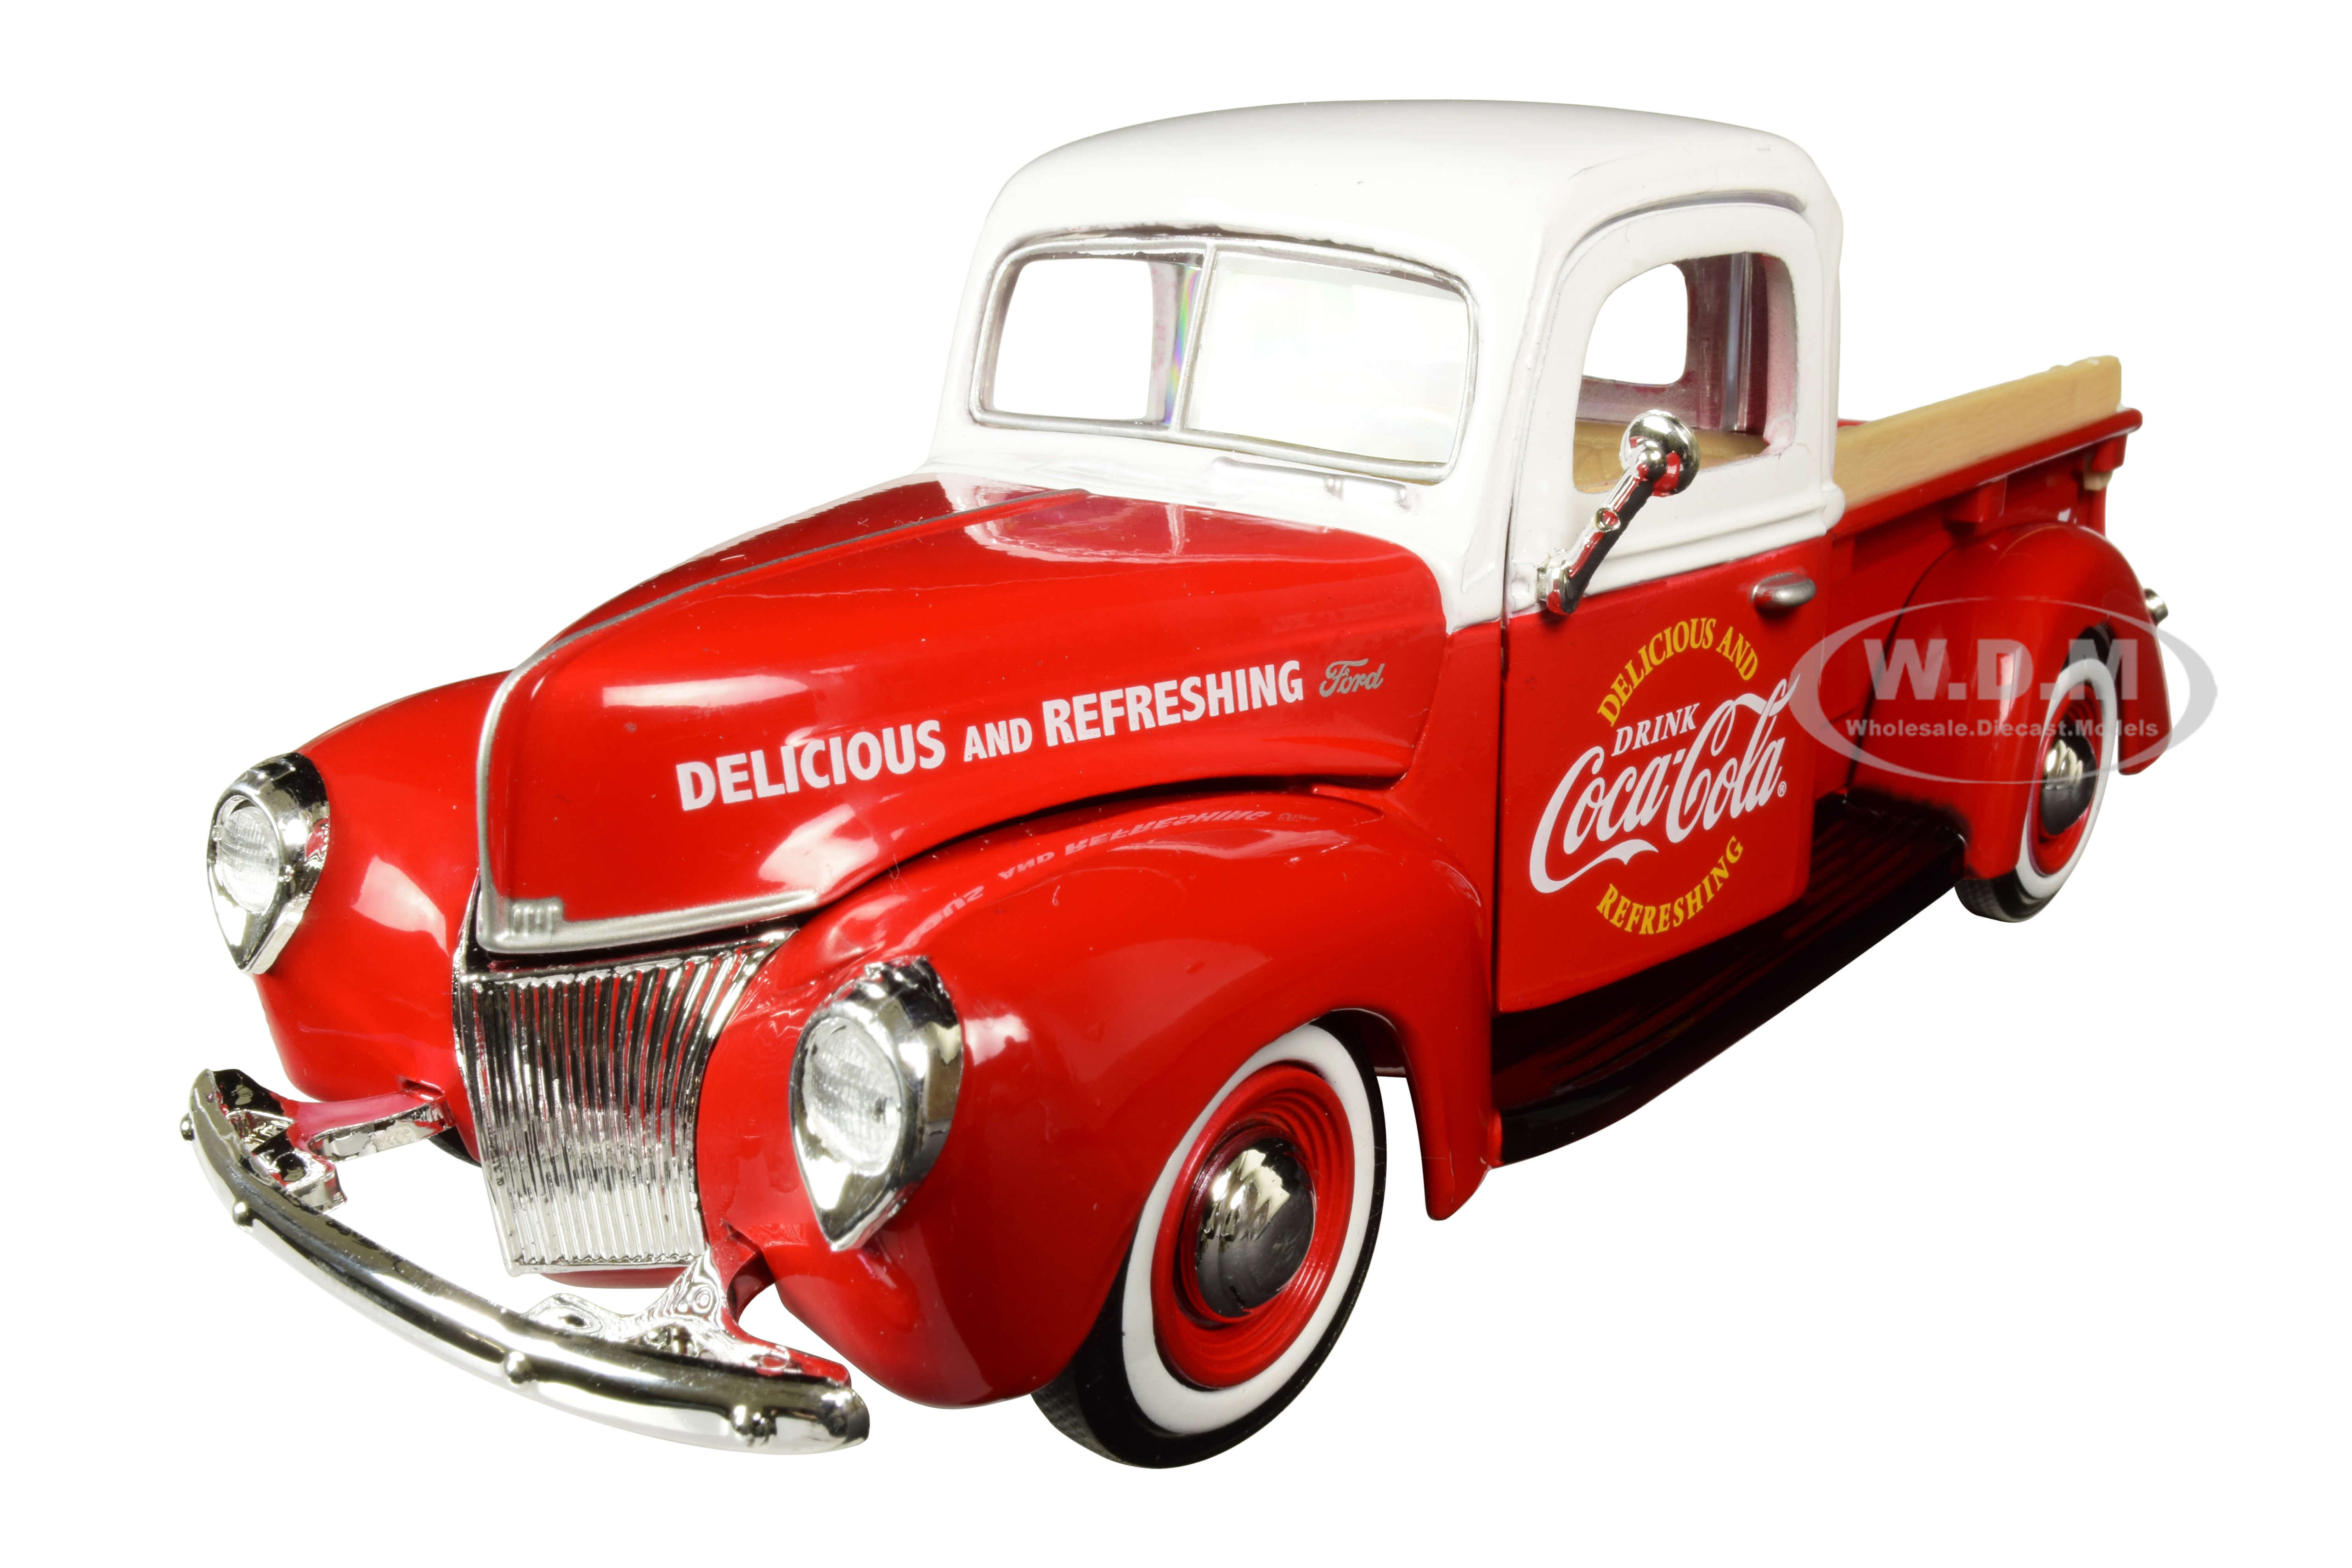 1940 Ford Pickup Truck "Coca-Cola" Red and White with "Coca-Cola" Cooler Accessory 1/24 Diecast Model Car by Motor City Classics